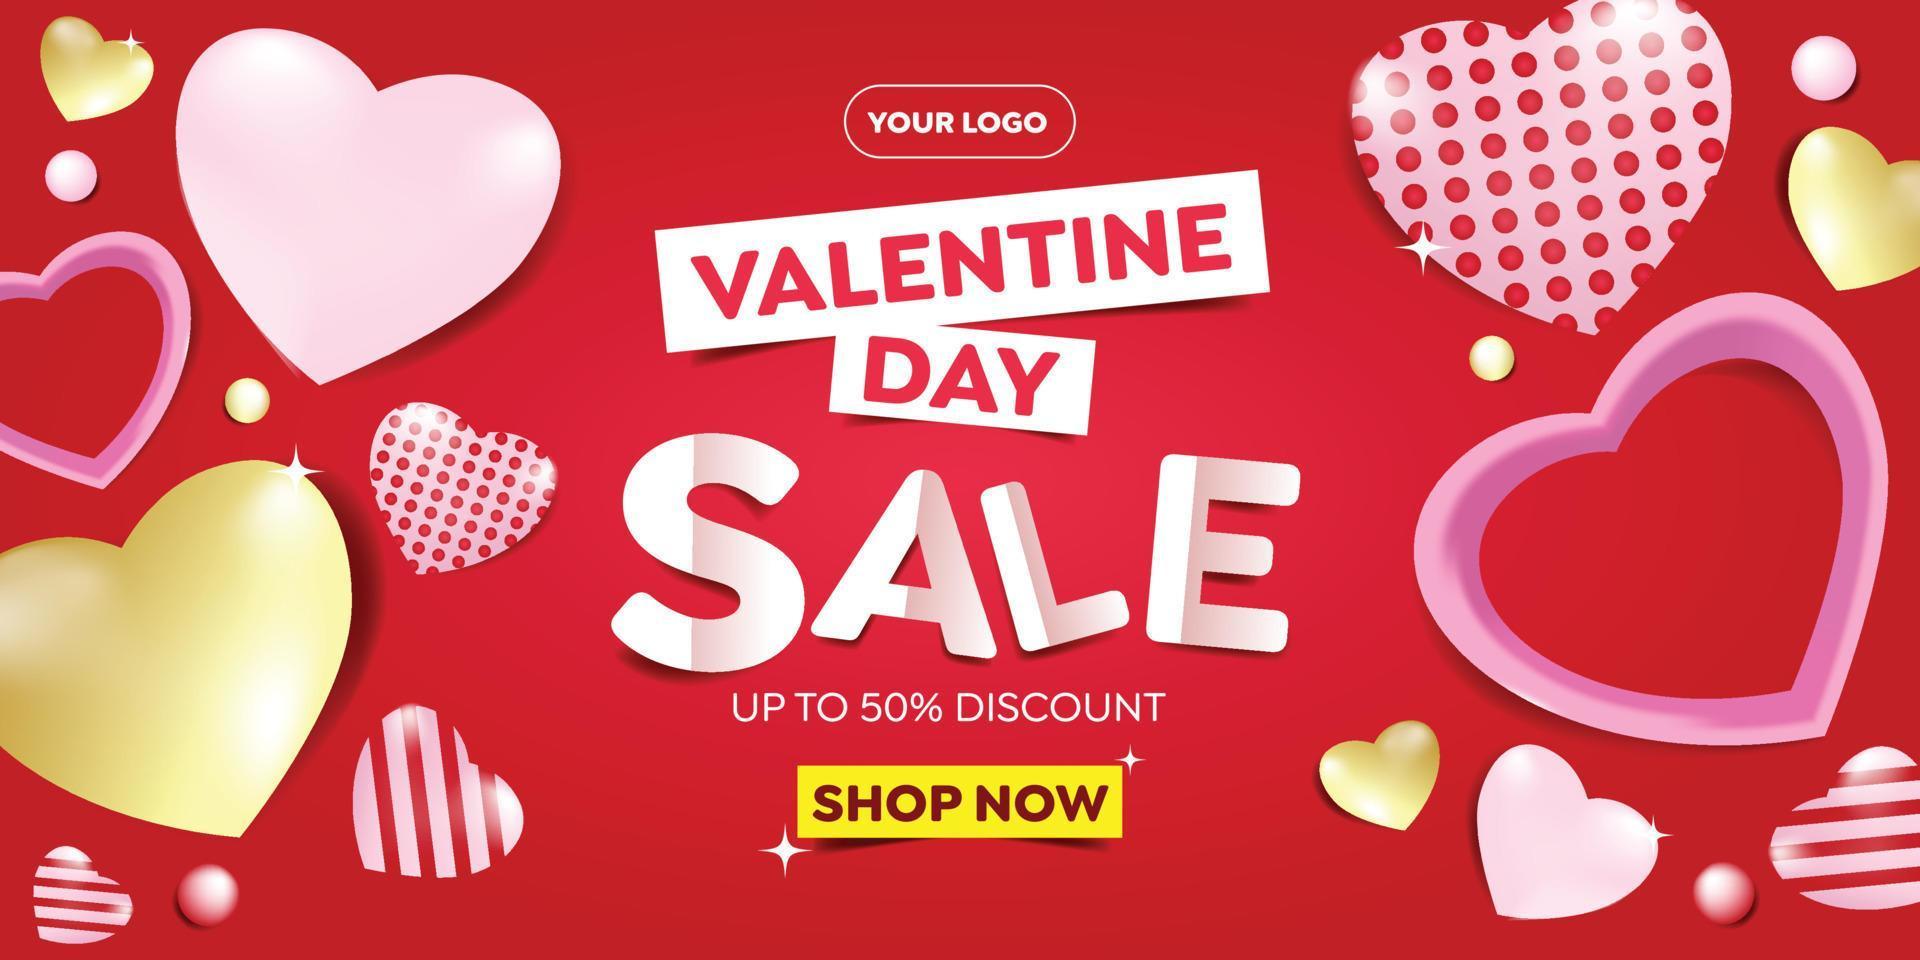 Trendy editable Valentine day vertical banner template set with red realistic hearts for banner, flyer, brochure, story or stories on social media. Vector illustration